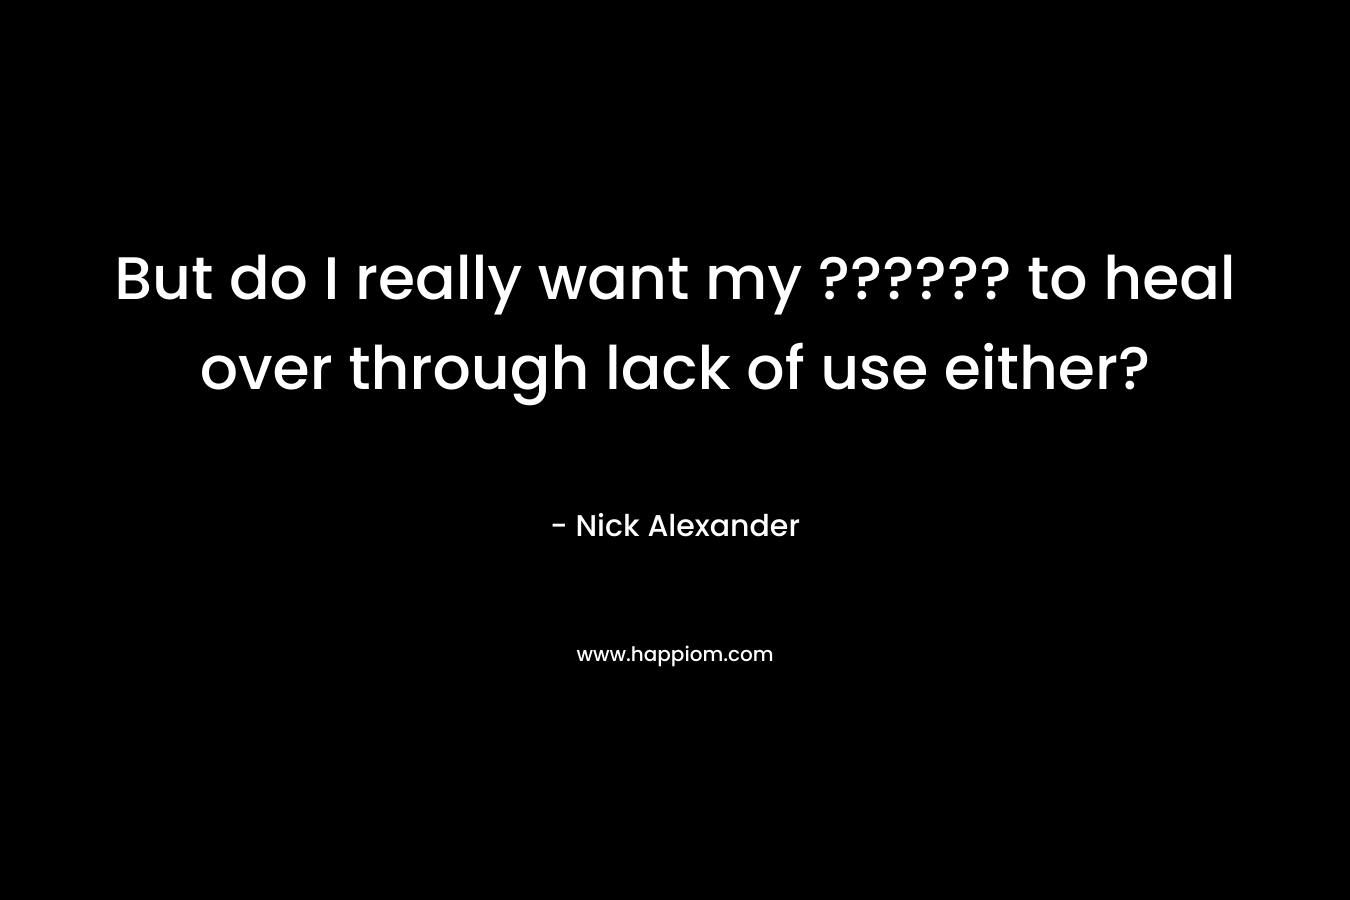 But do I really want my ?????? to heal over through lack of use either? – Nick Alexander